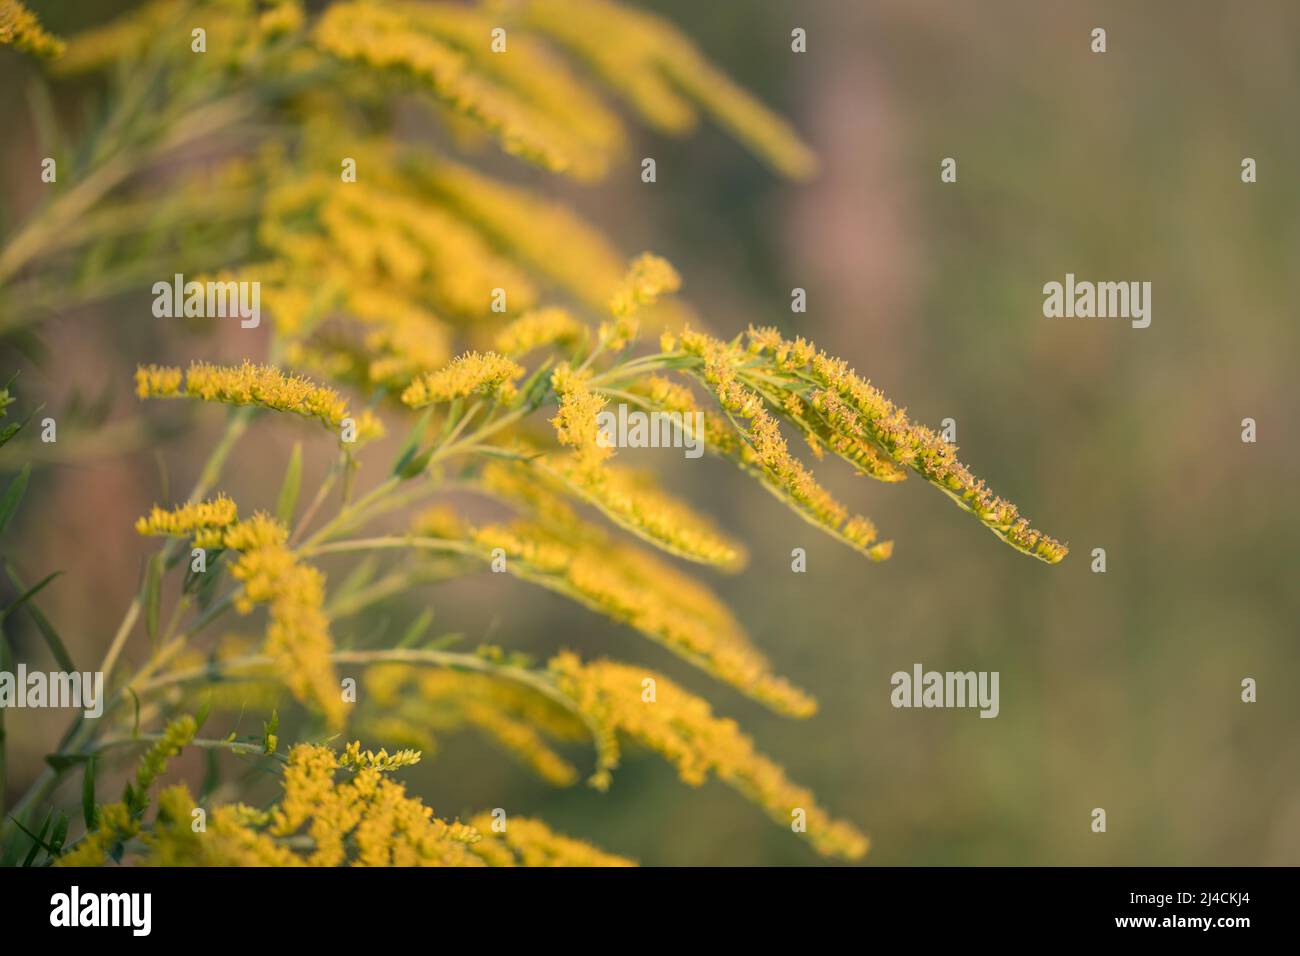 Canada goldenrod (Solidago canadensis), invasive plant blooms in sunshine in the garden, Velbert, Germany Stock Photo